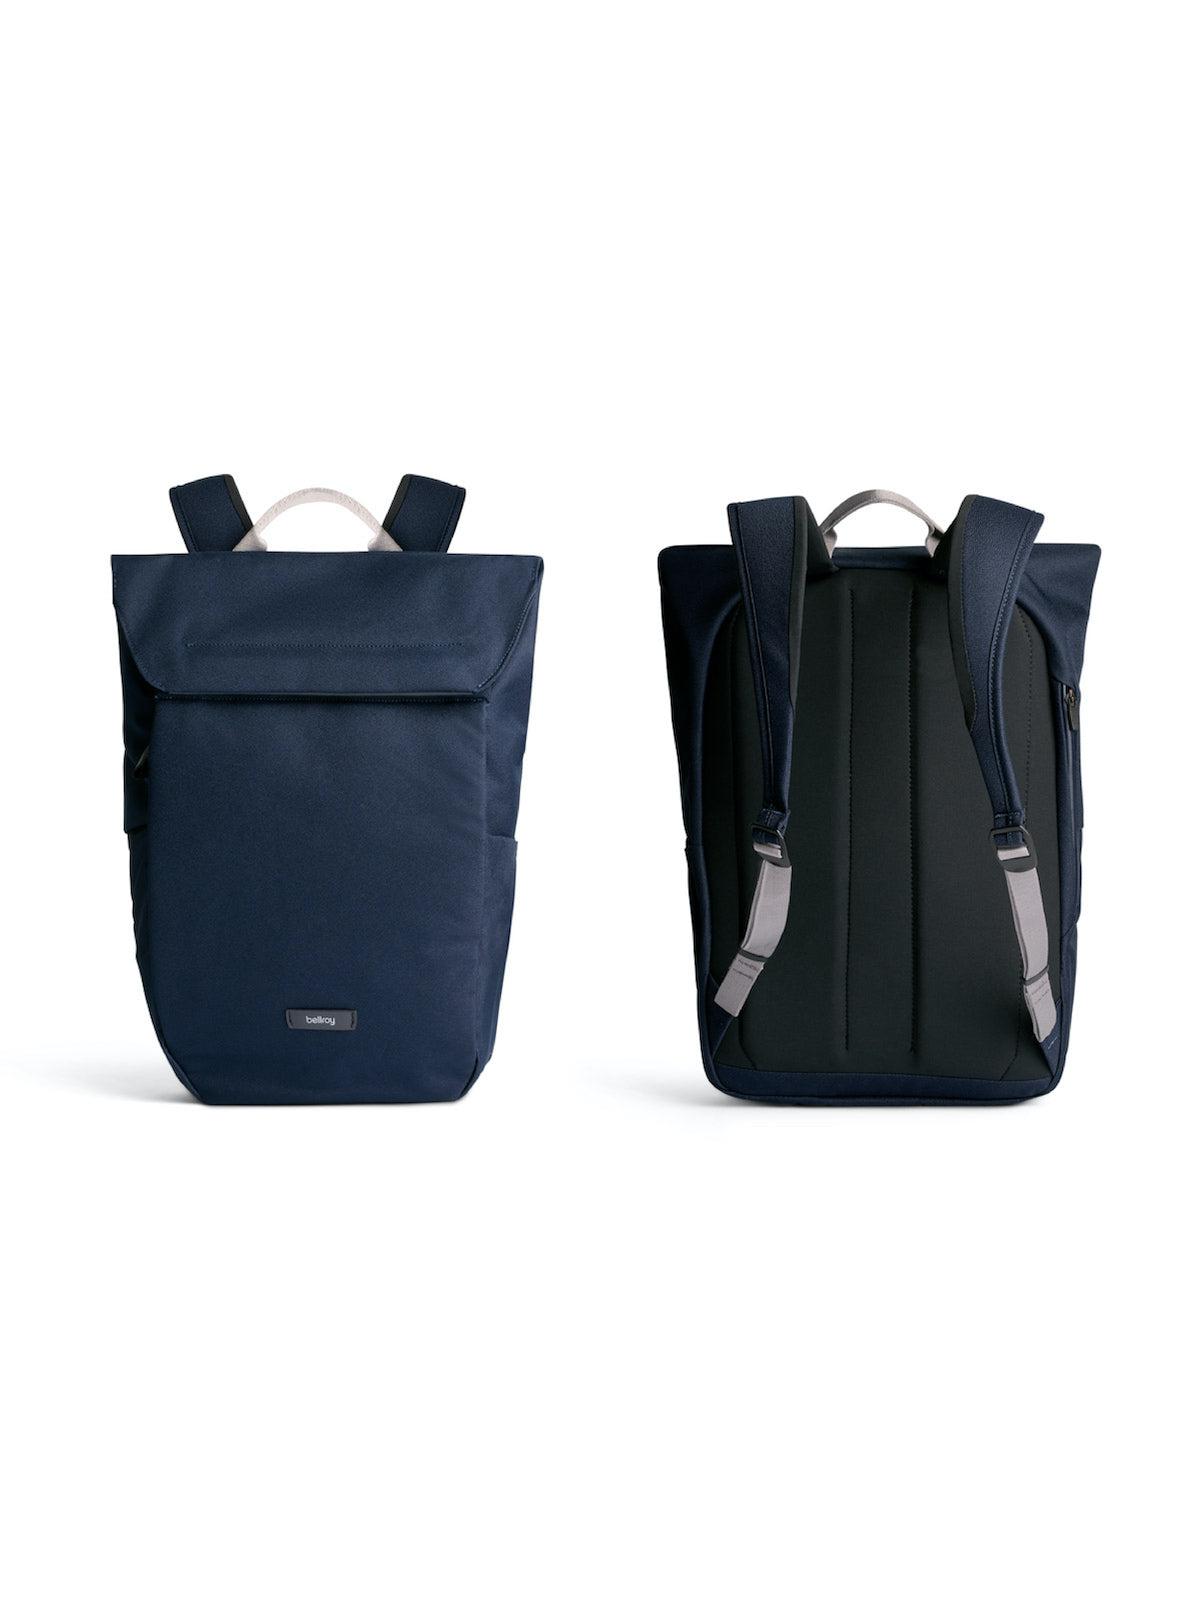 Bellroy Melbourne Backpack Compact Navy